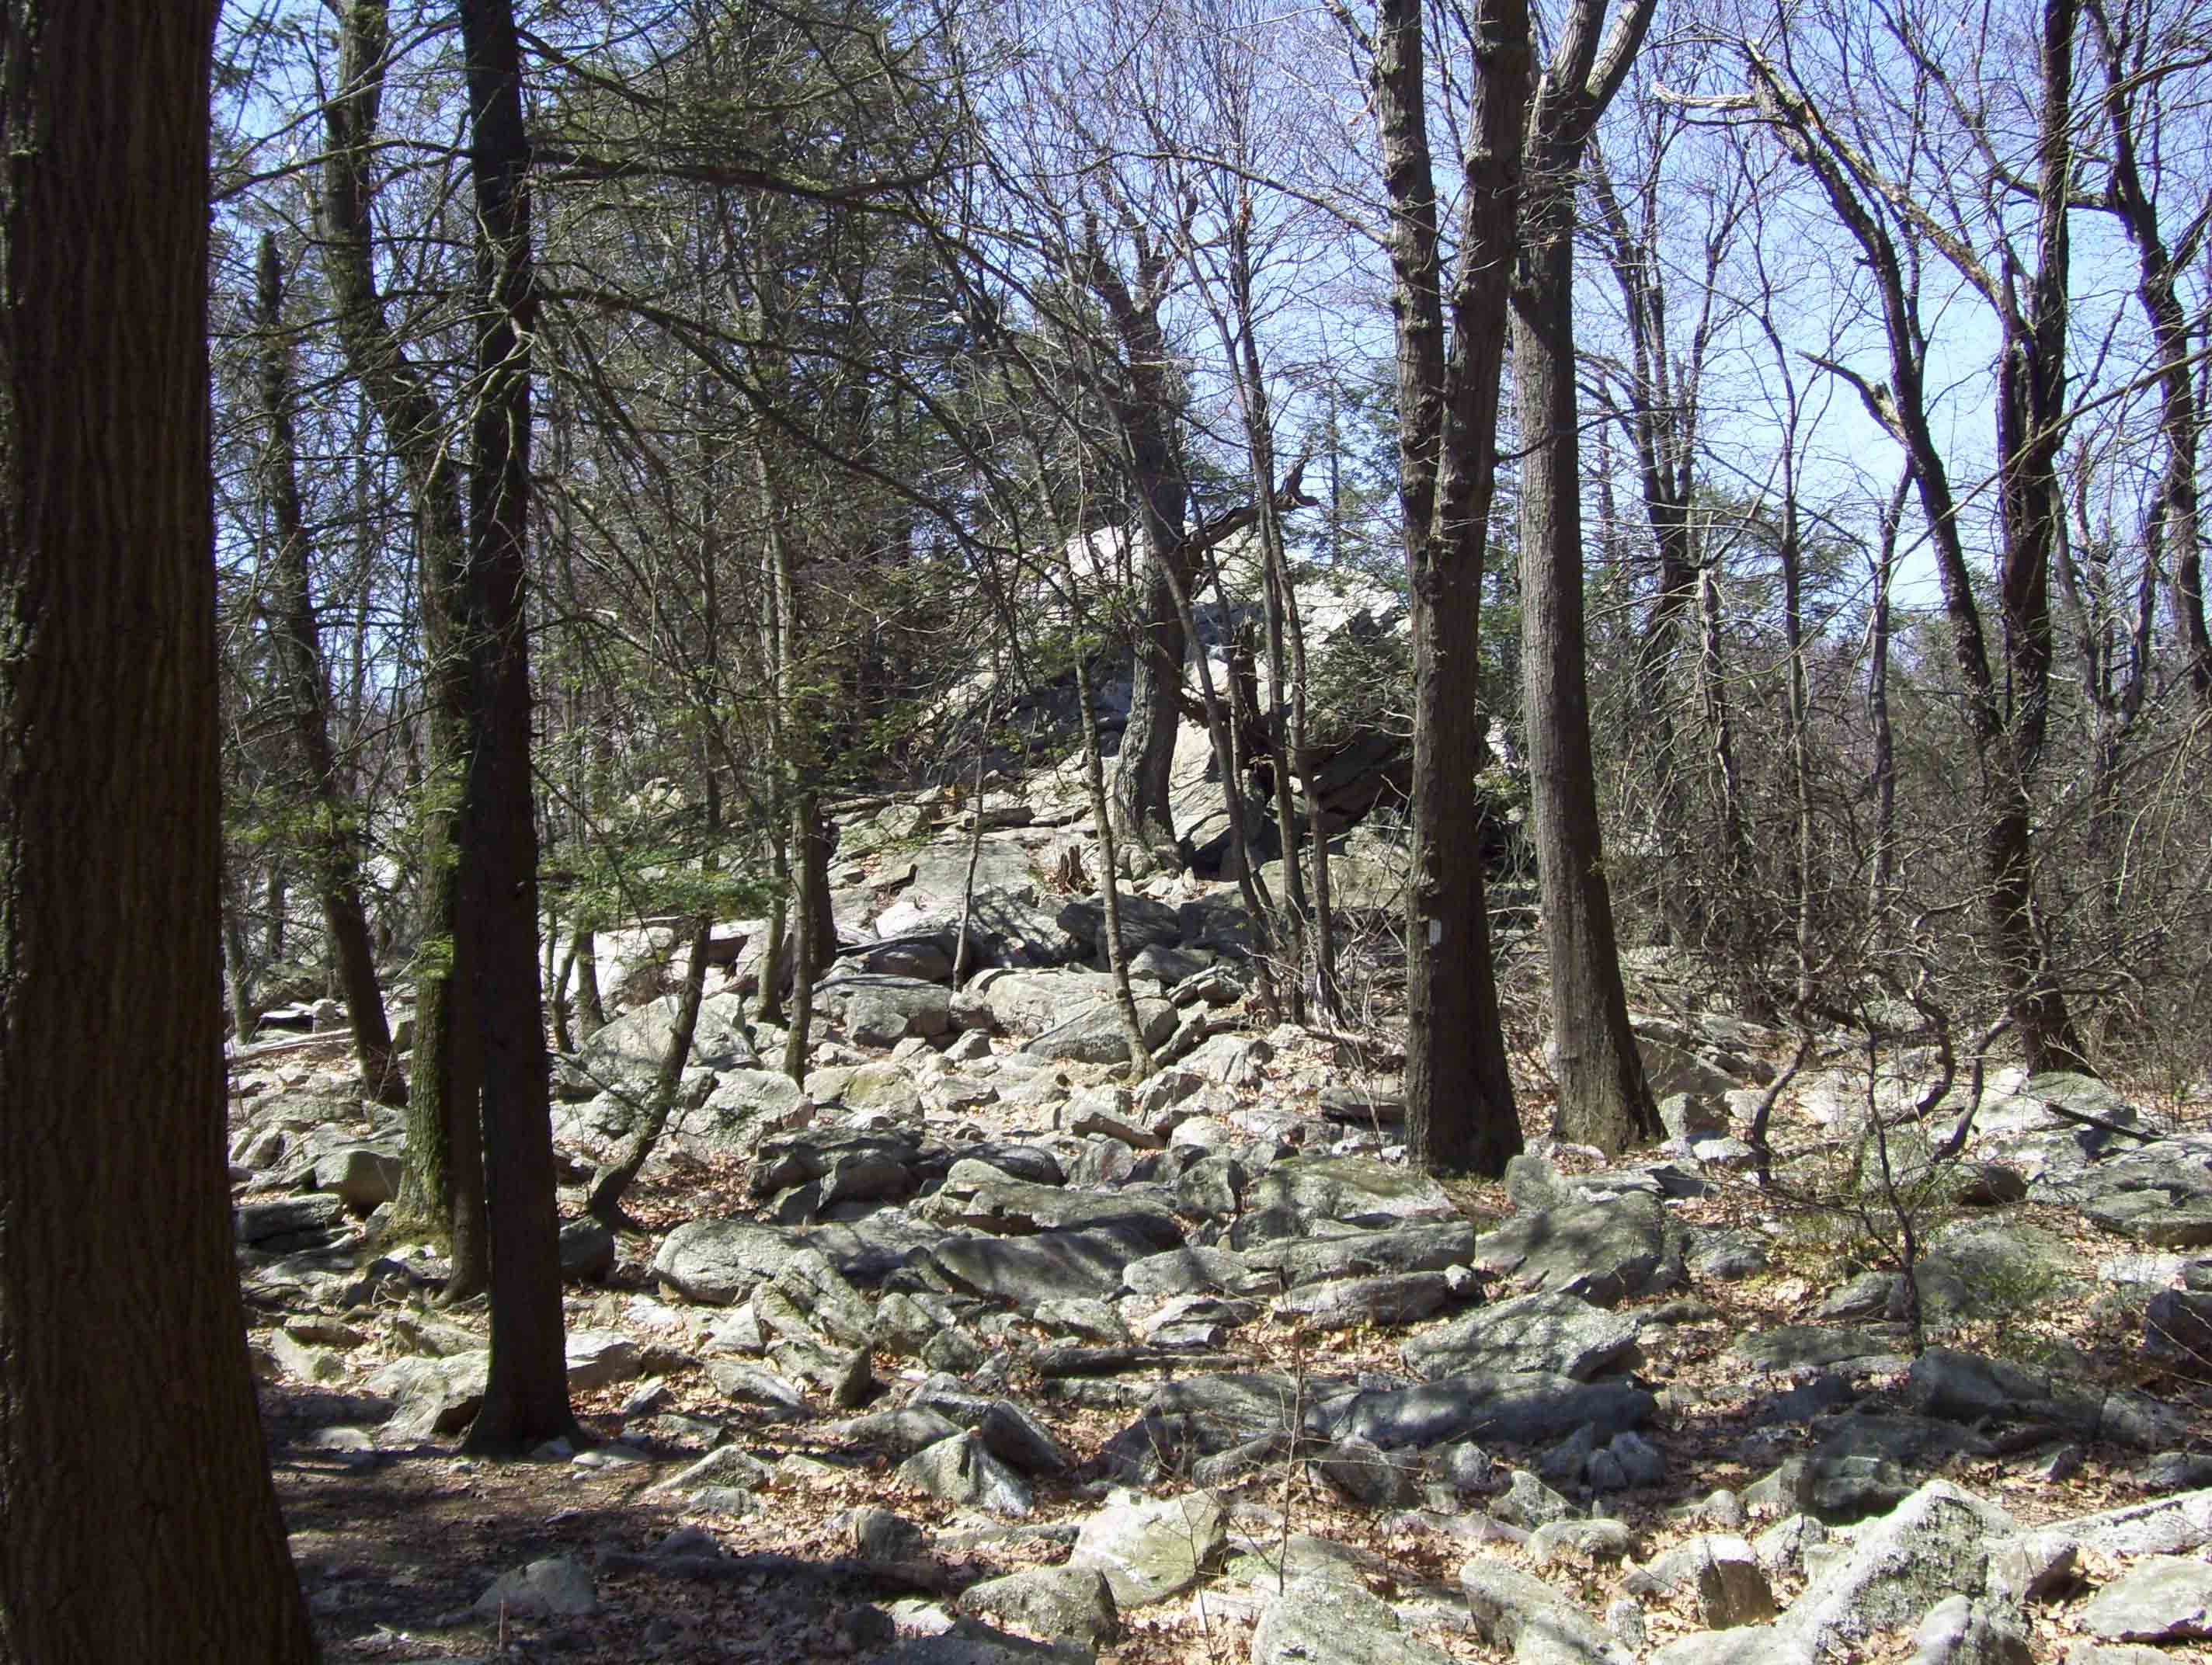 Approaching east (trail north) end of the knife-edge ridge known as "The Cliffs" (MM 10.5).  Courtesy dlcul@conncoll.edu